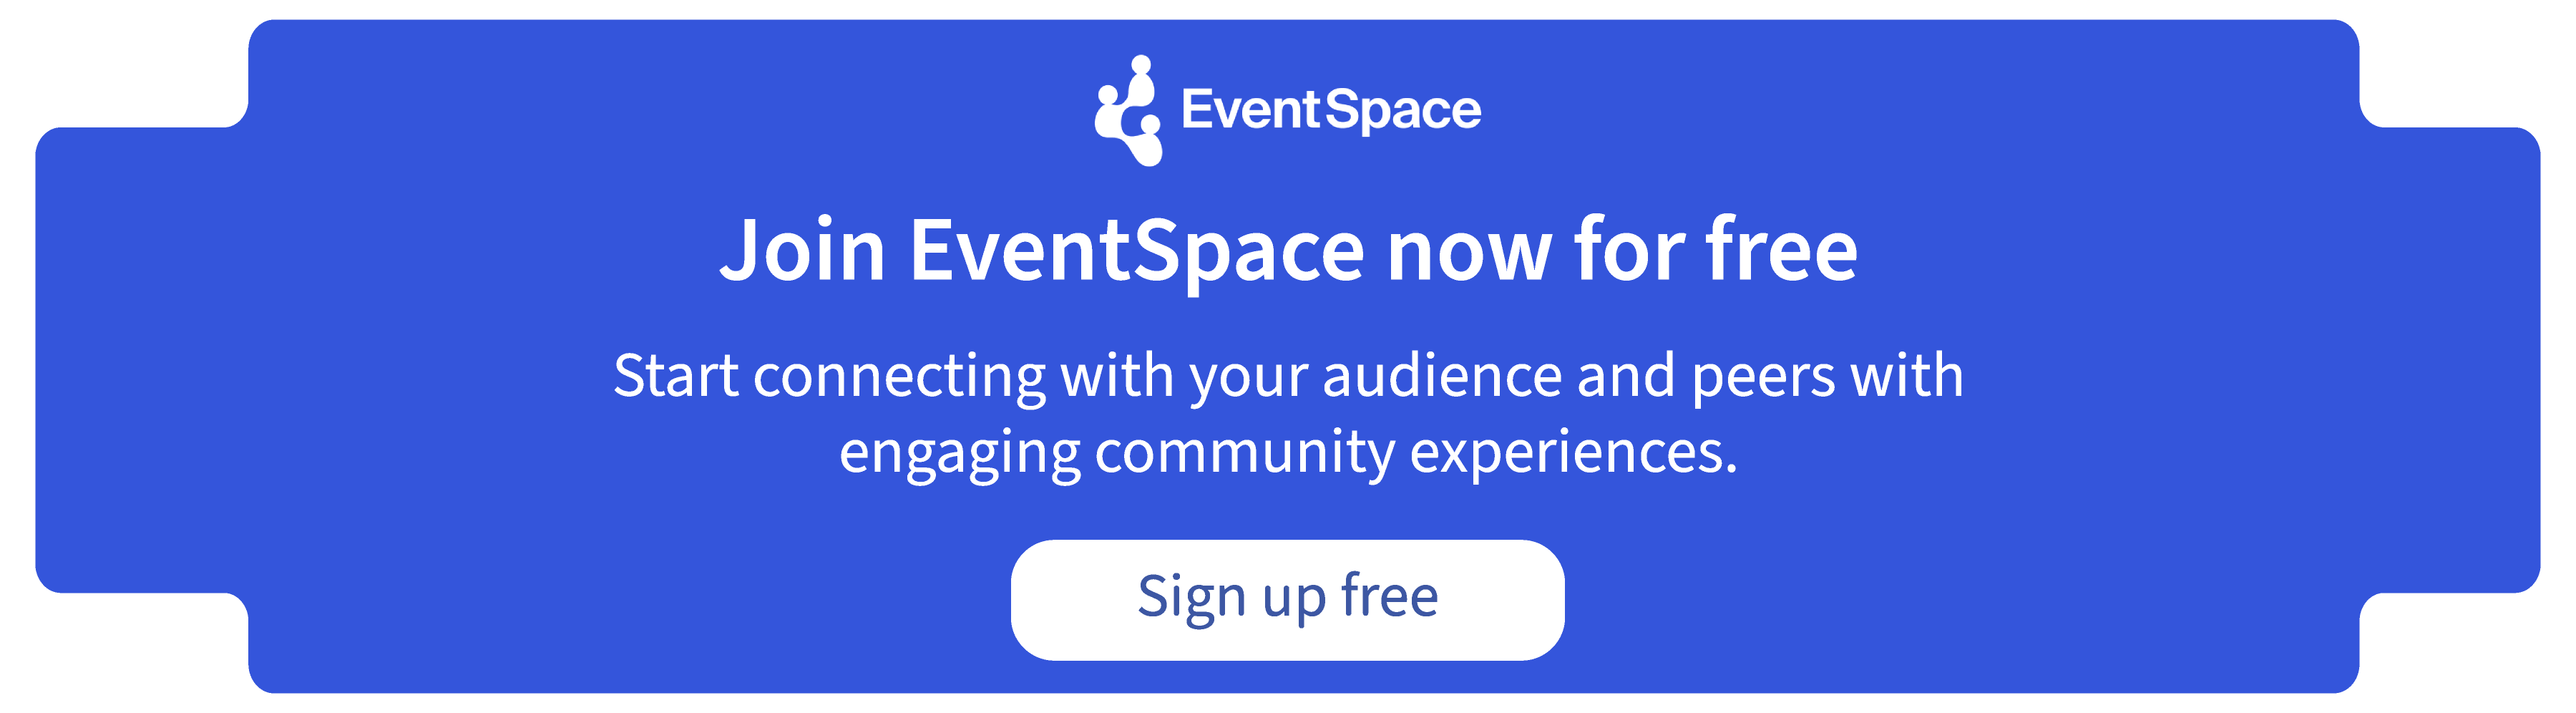 EventSpace - Sign Up - Banner